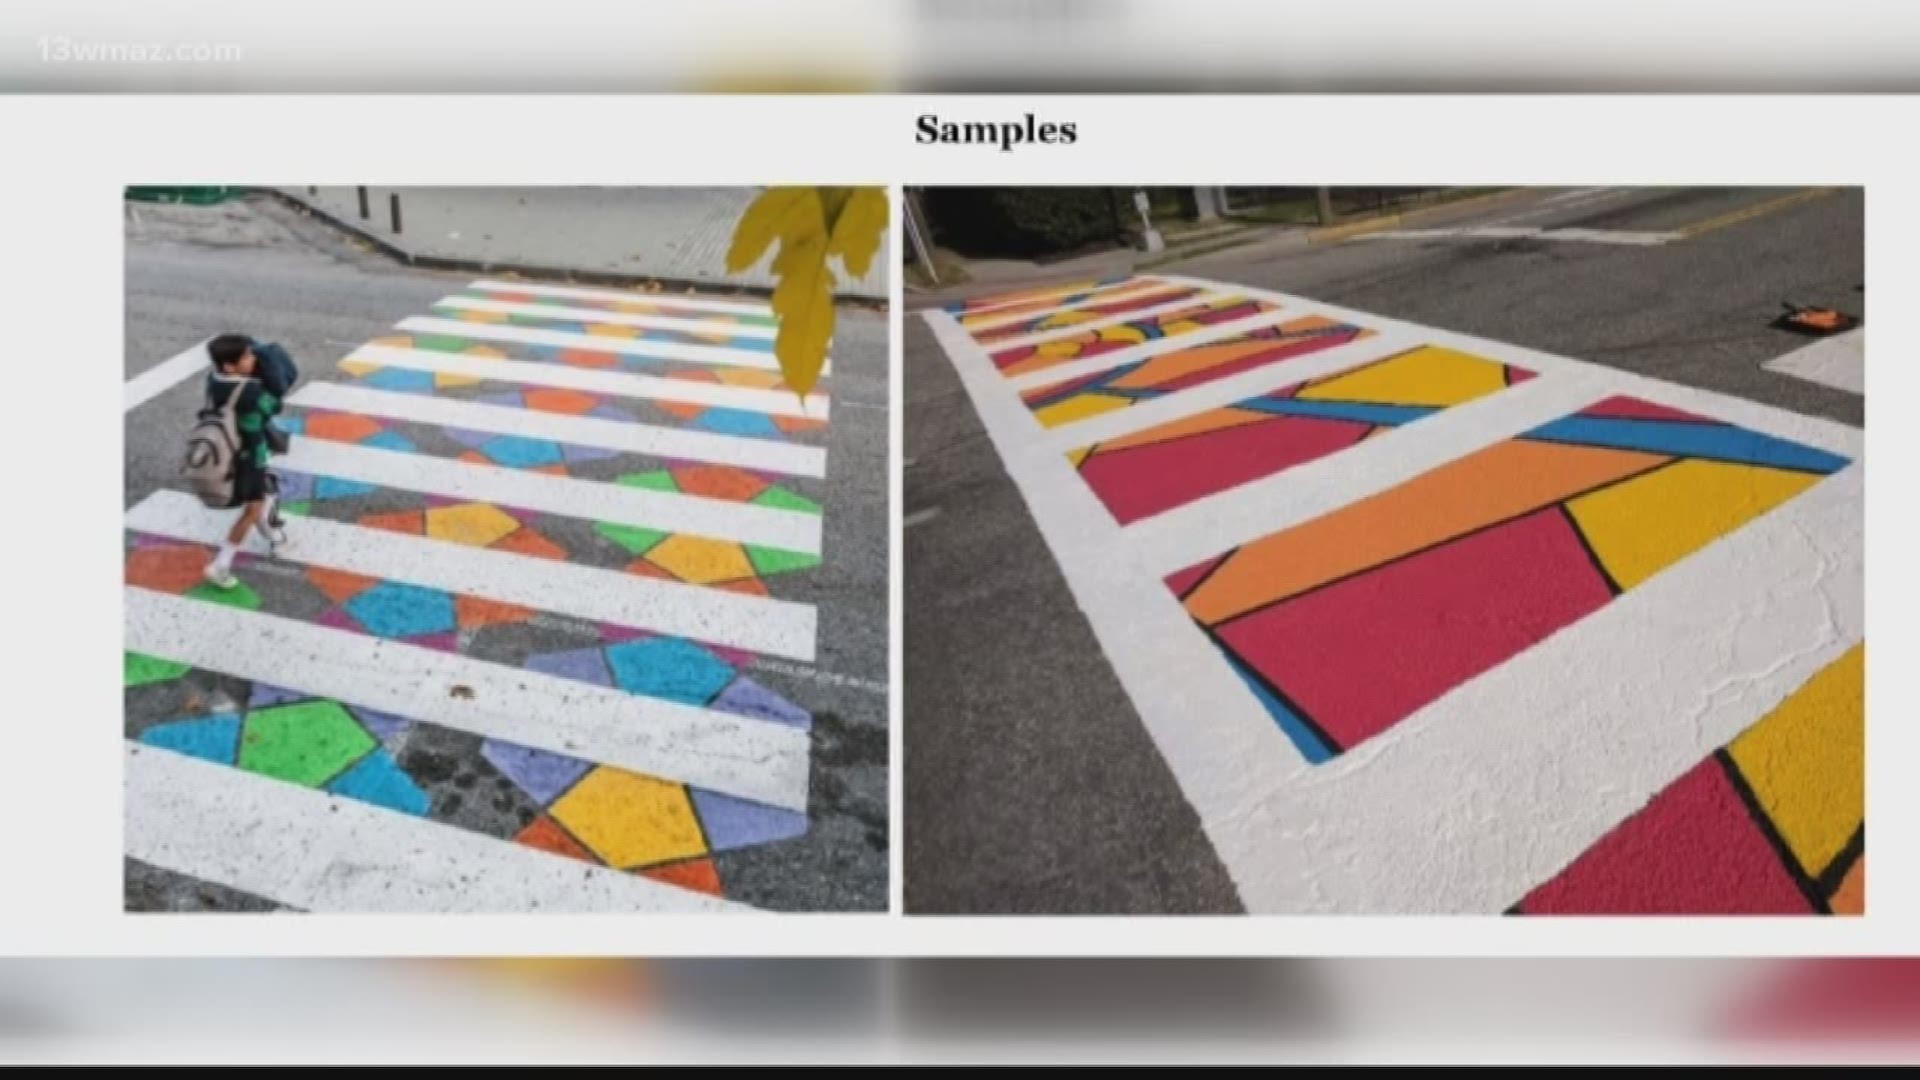 Some creative crosswalks are strolling into Macon soon. Sabrina Burse visited the College Hill neighborhood to find out details about the crosswalk art project.